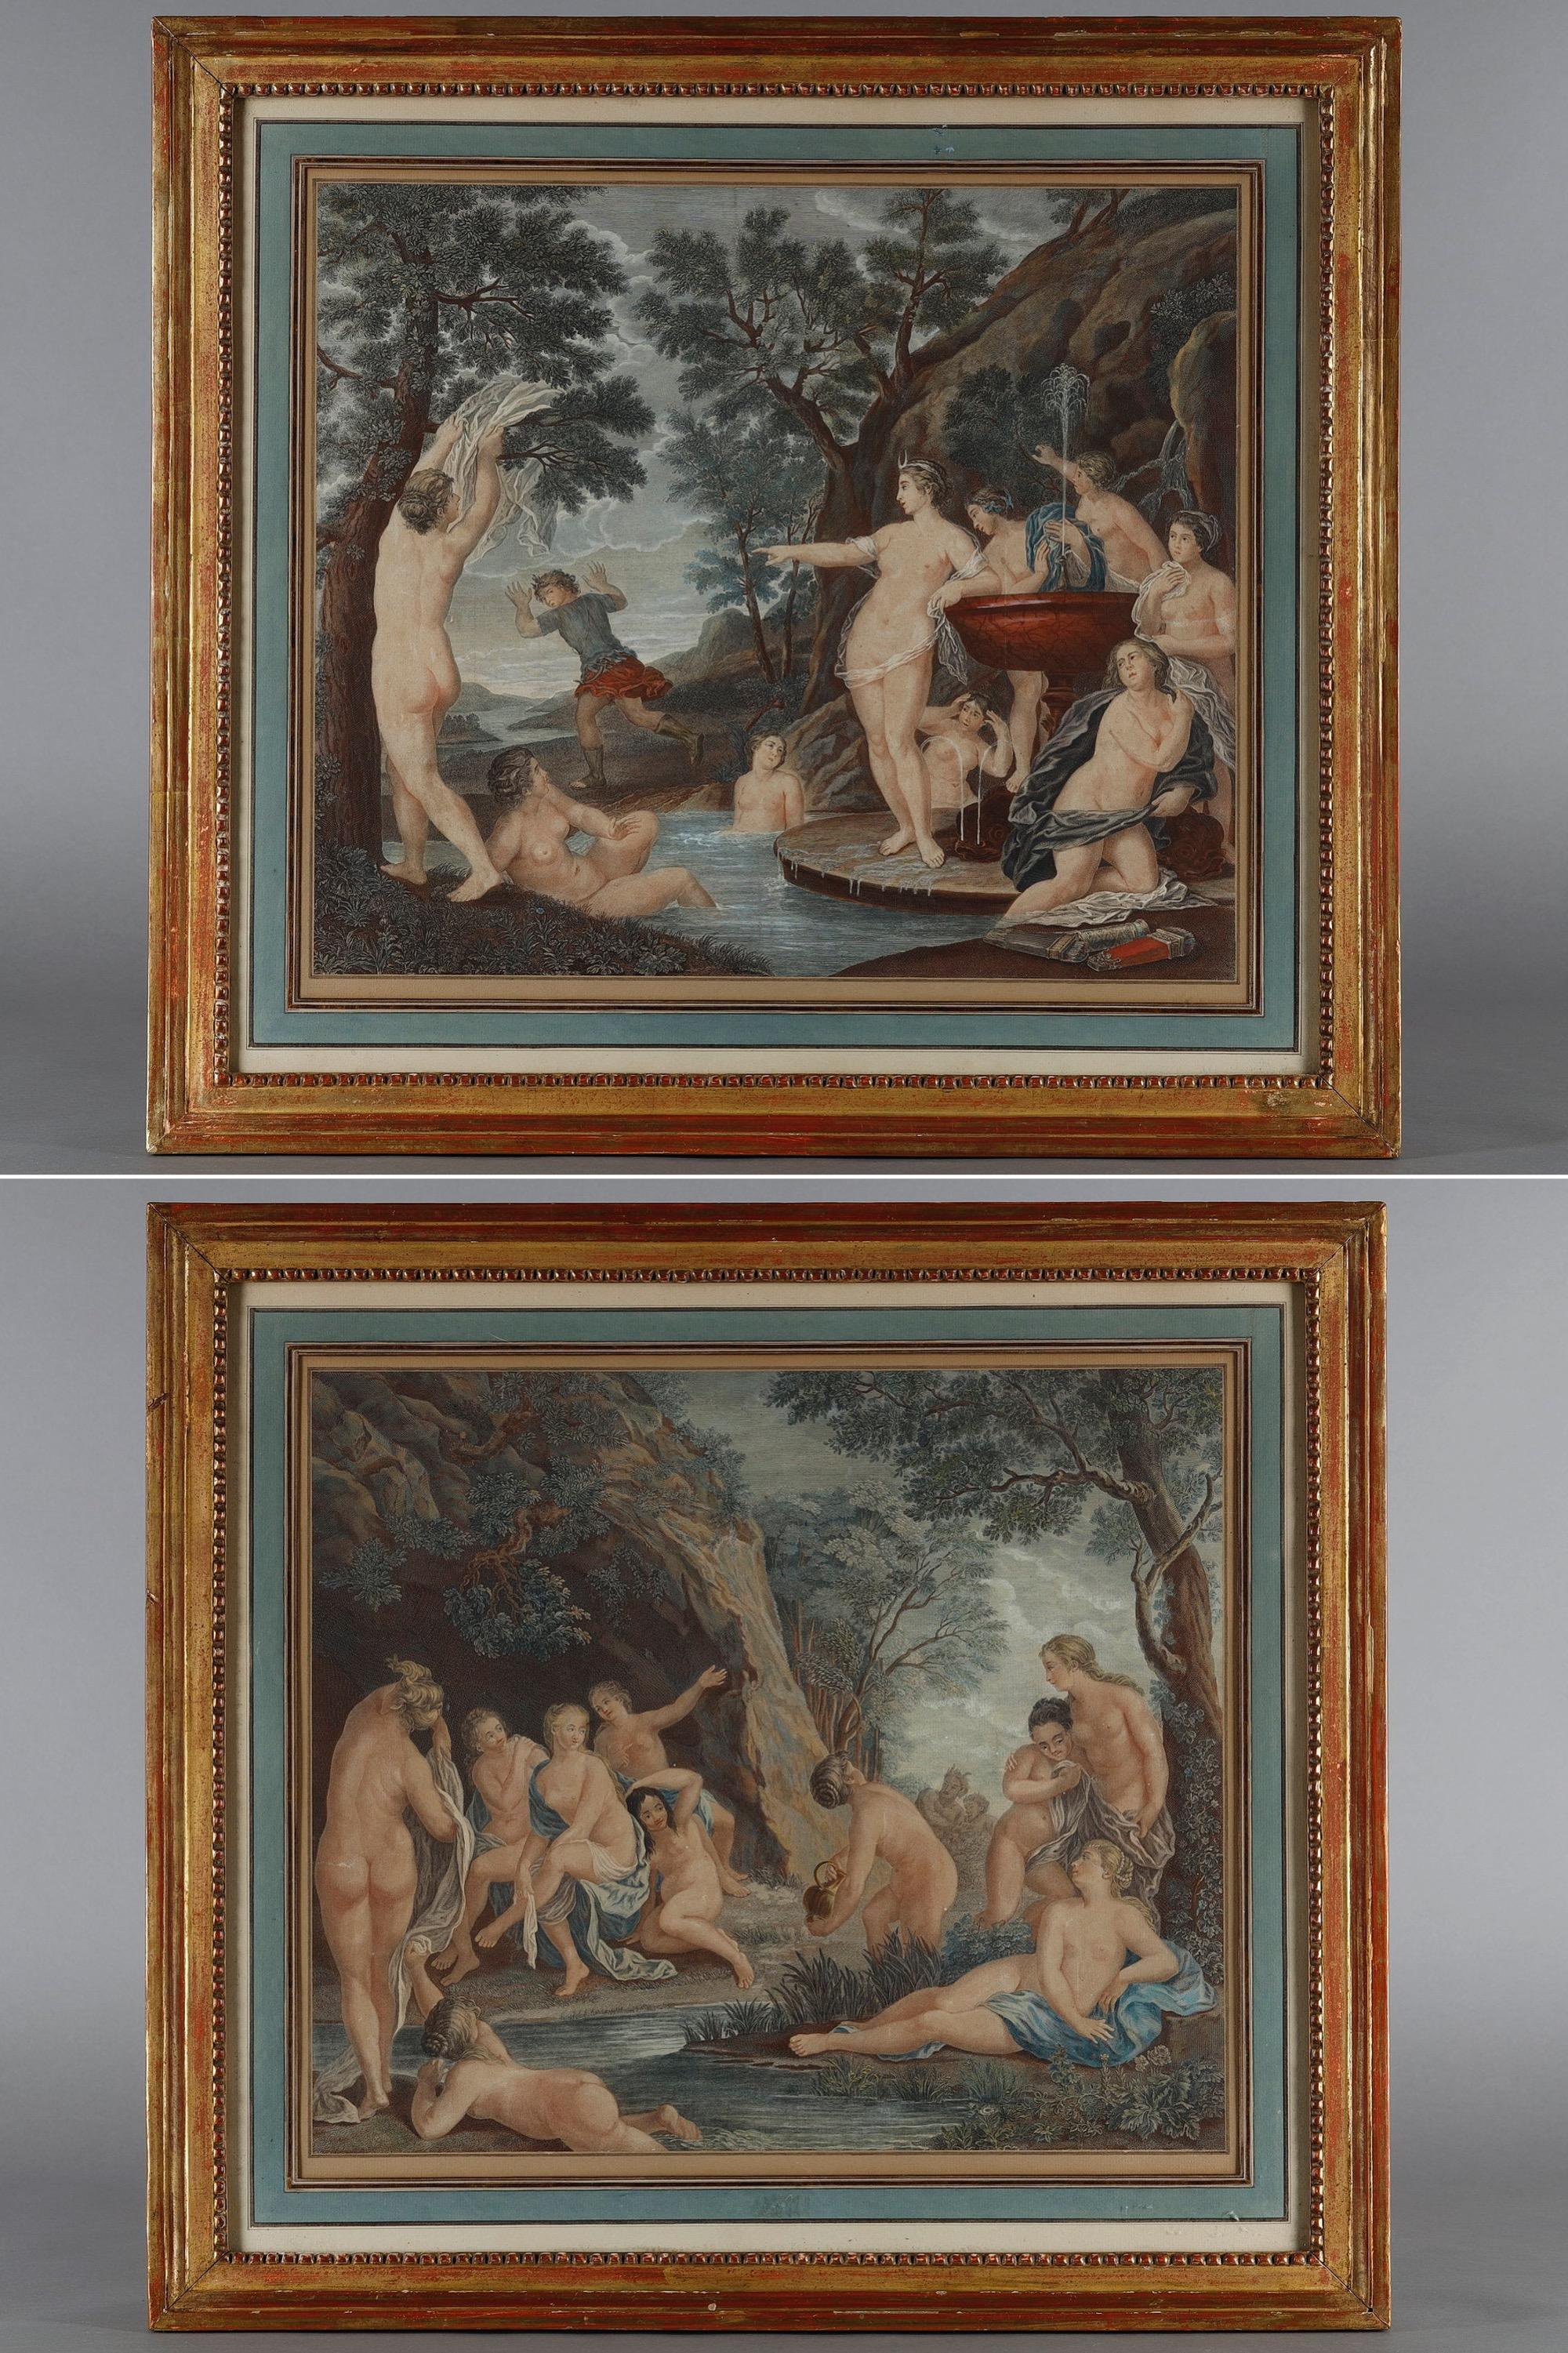 Pair of polychrome engravings, 18th century school, after works by Francesco Albani (1578-1660), depicting 